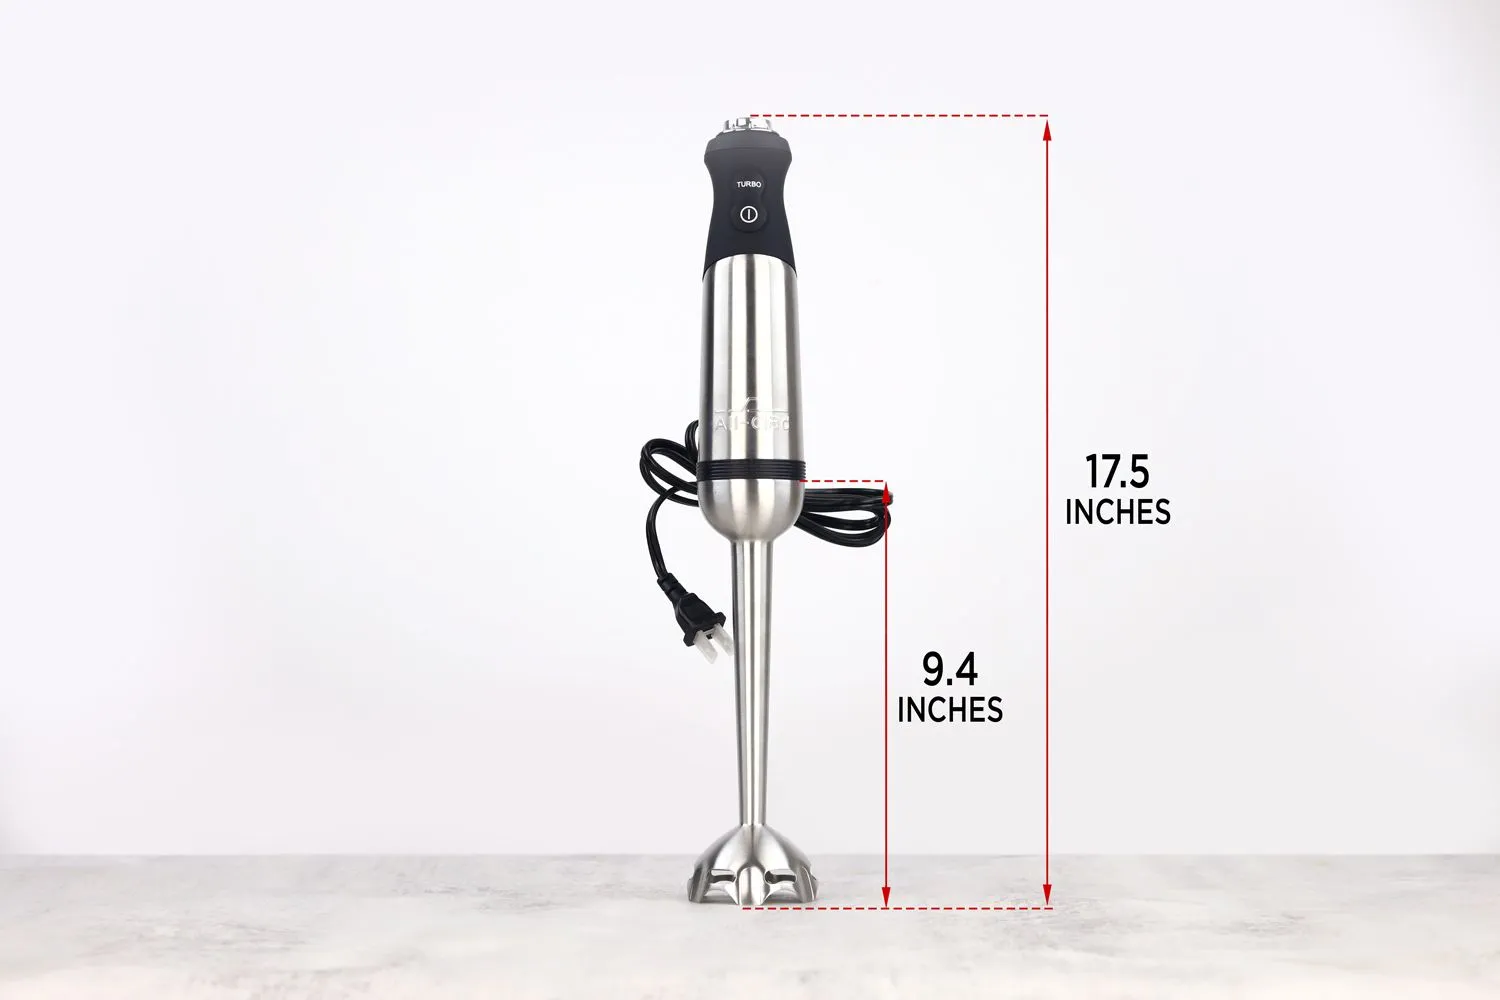 All-Clad Kz750d Stainless Steel Immersion Blender with Detachable Shaft